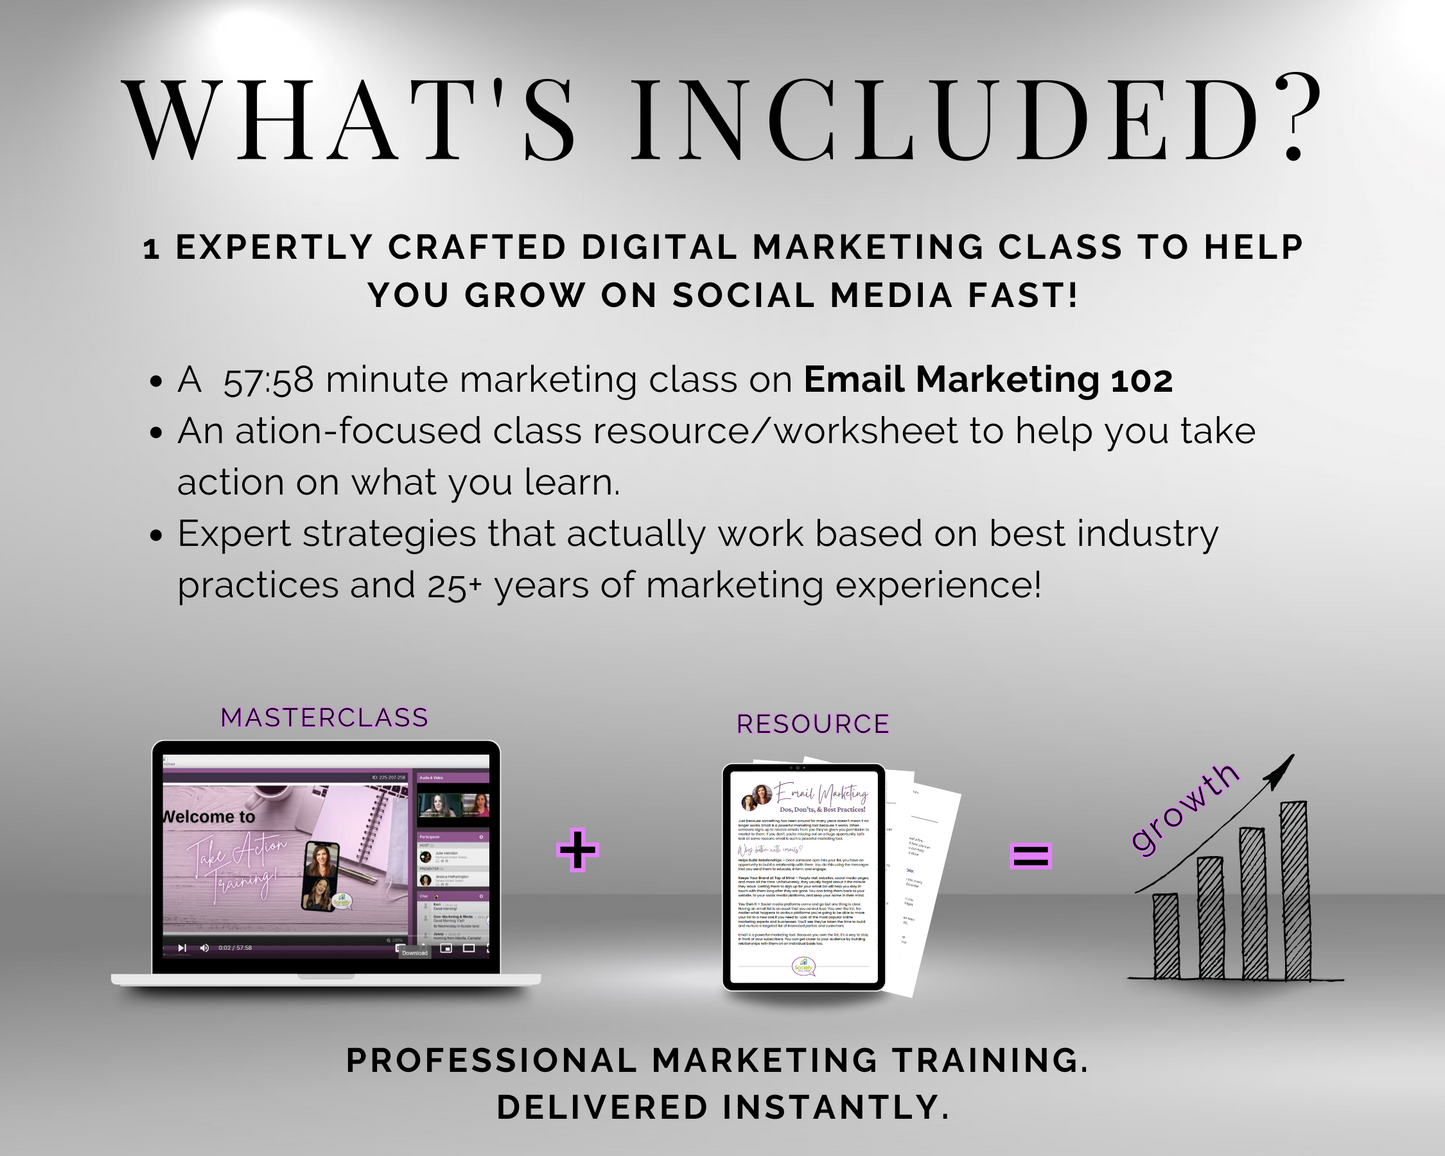 What's included in the TAT - Email Marketing 102 Masterclass training class by Get Socially Inclined focused on email marketing to improve skills?